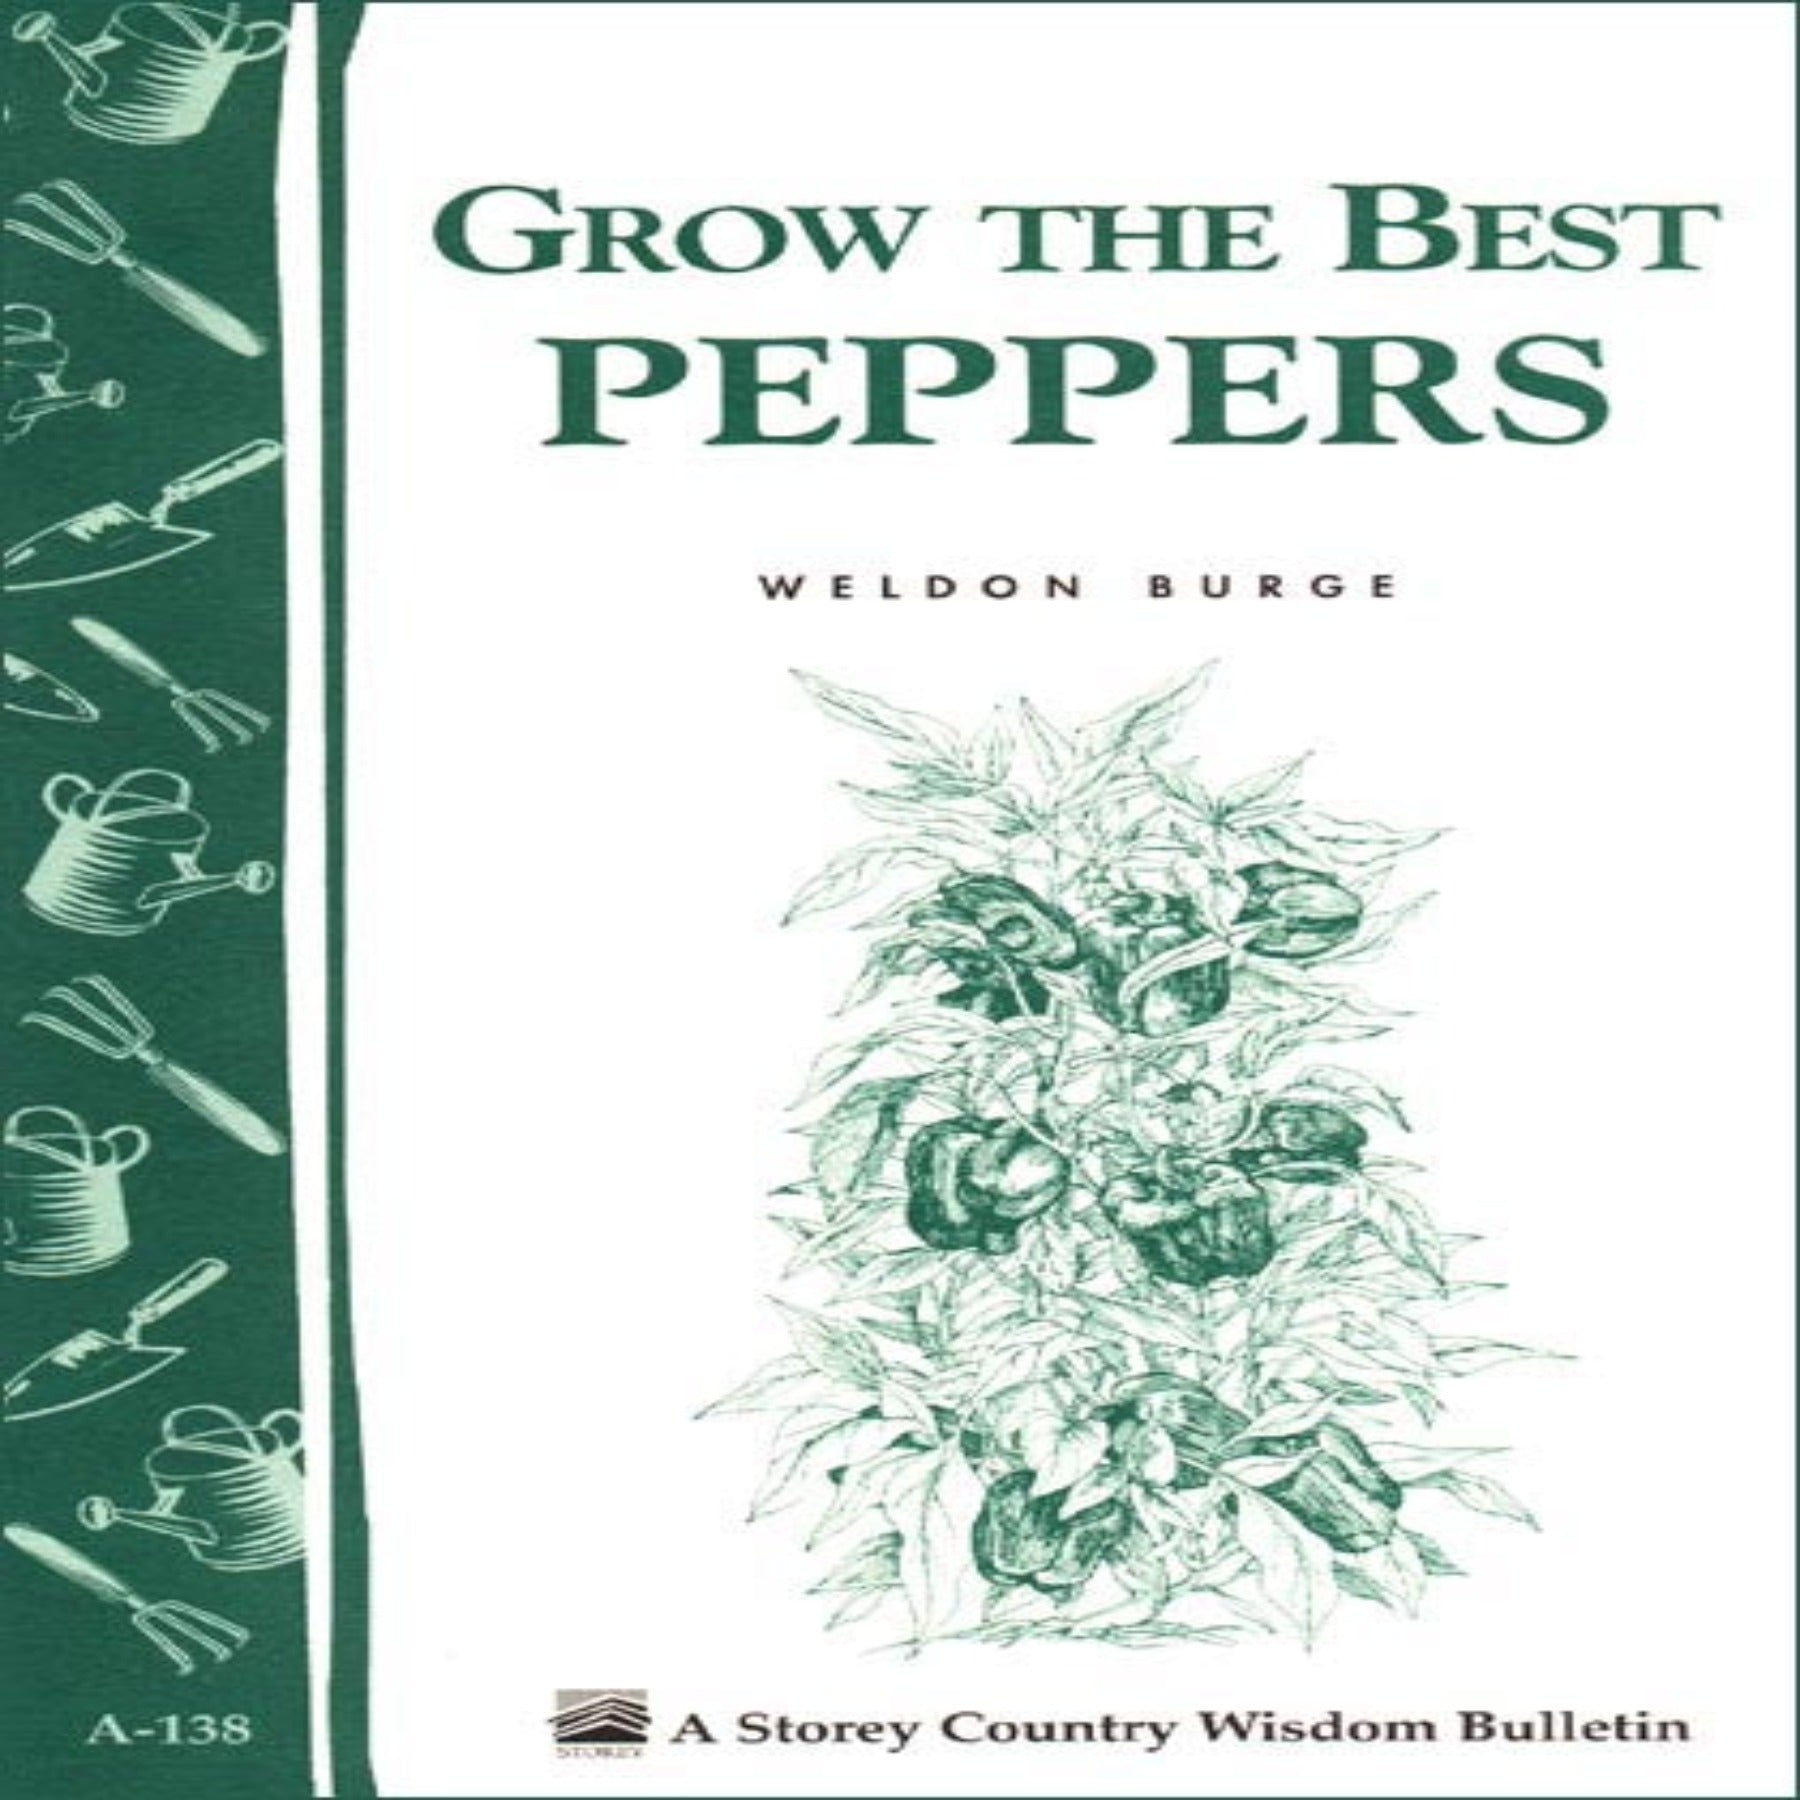 Book:  Grow the Best Peppers